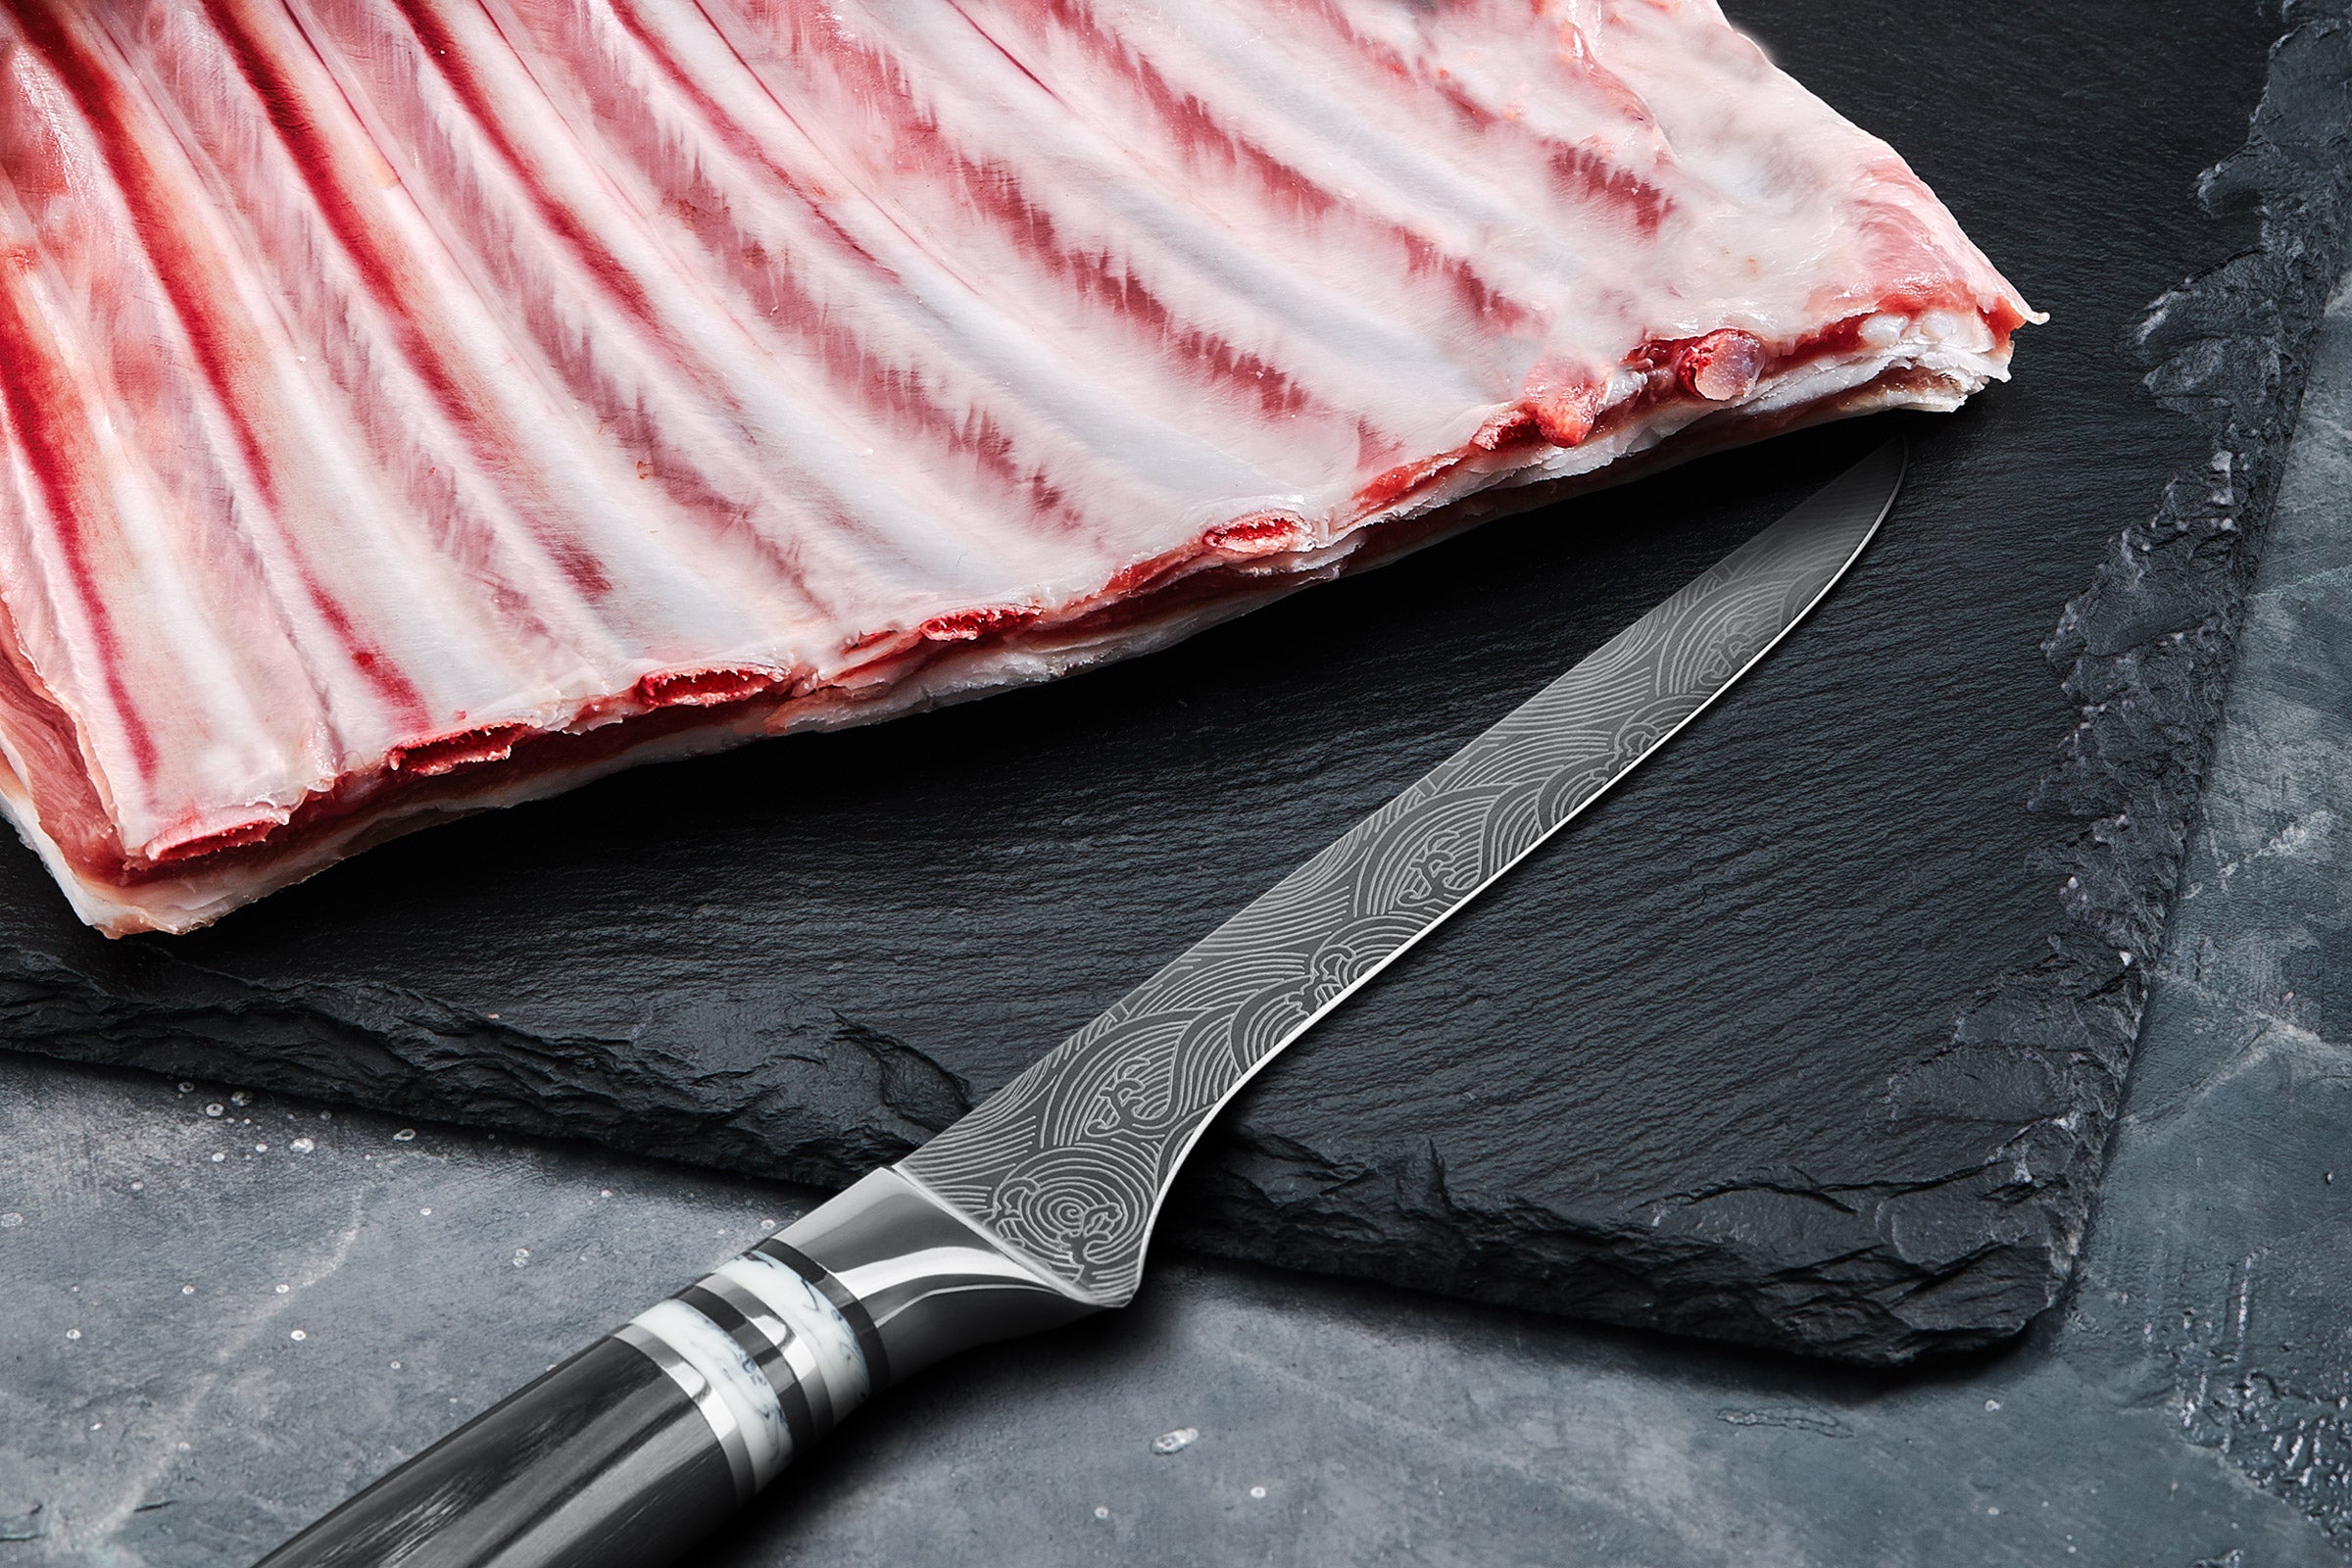 Getting the Ronin Boning Knife ready to slice through a large rack of ribs.